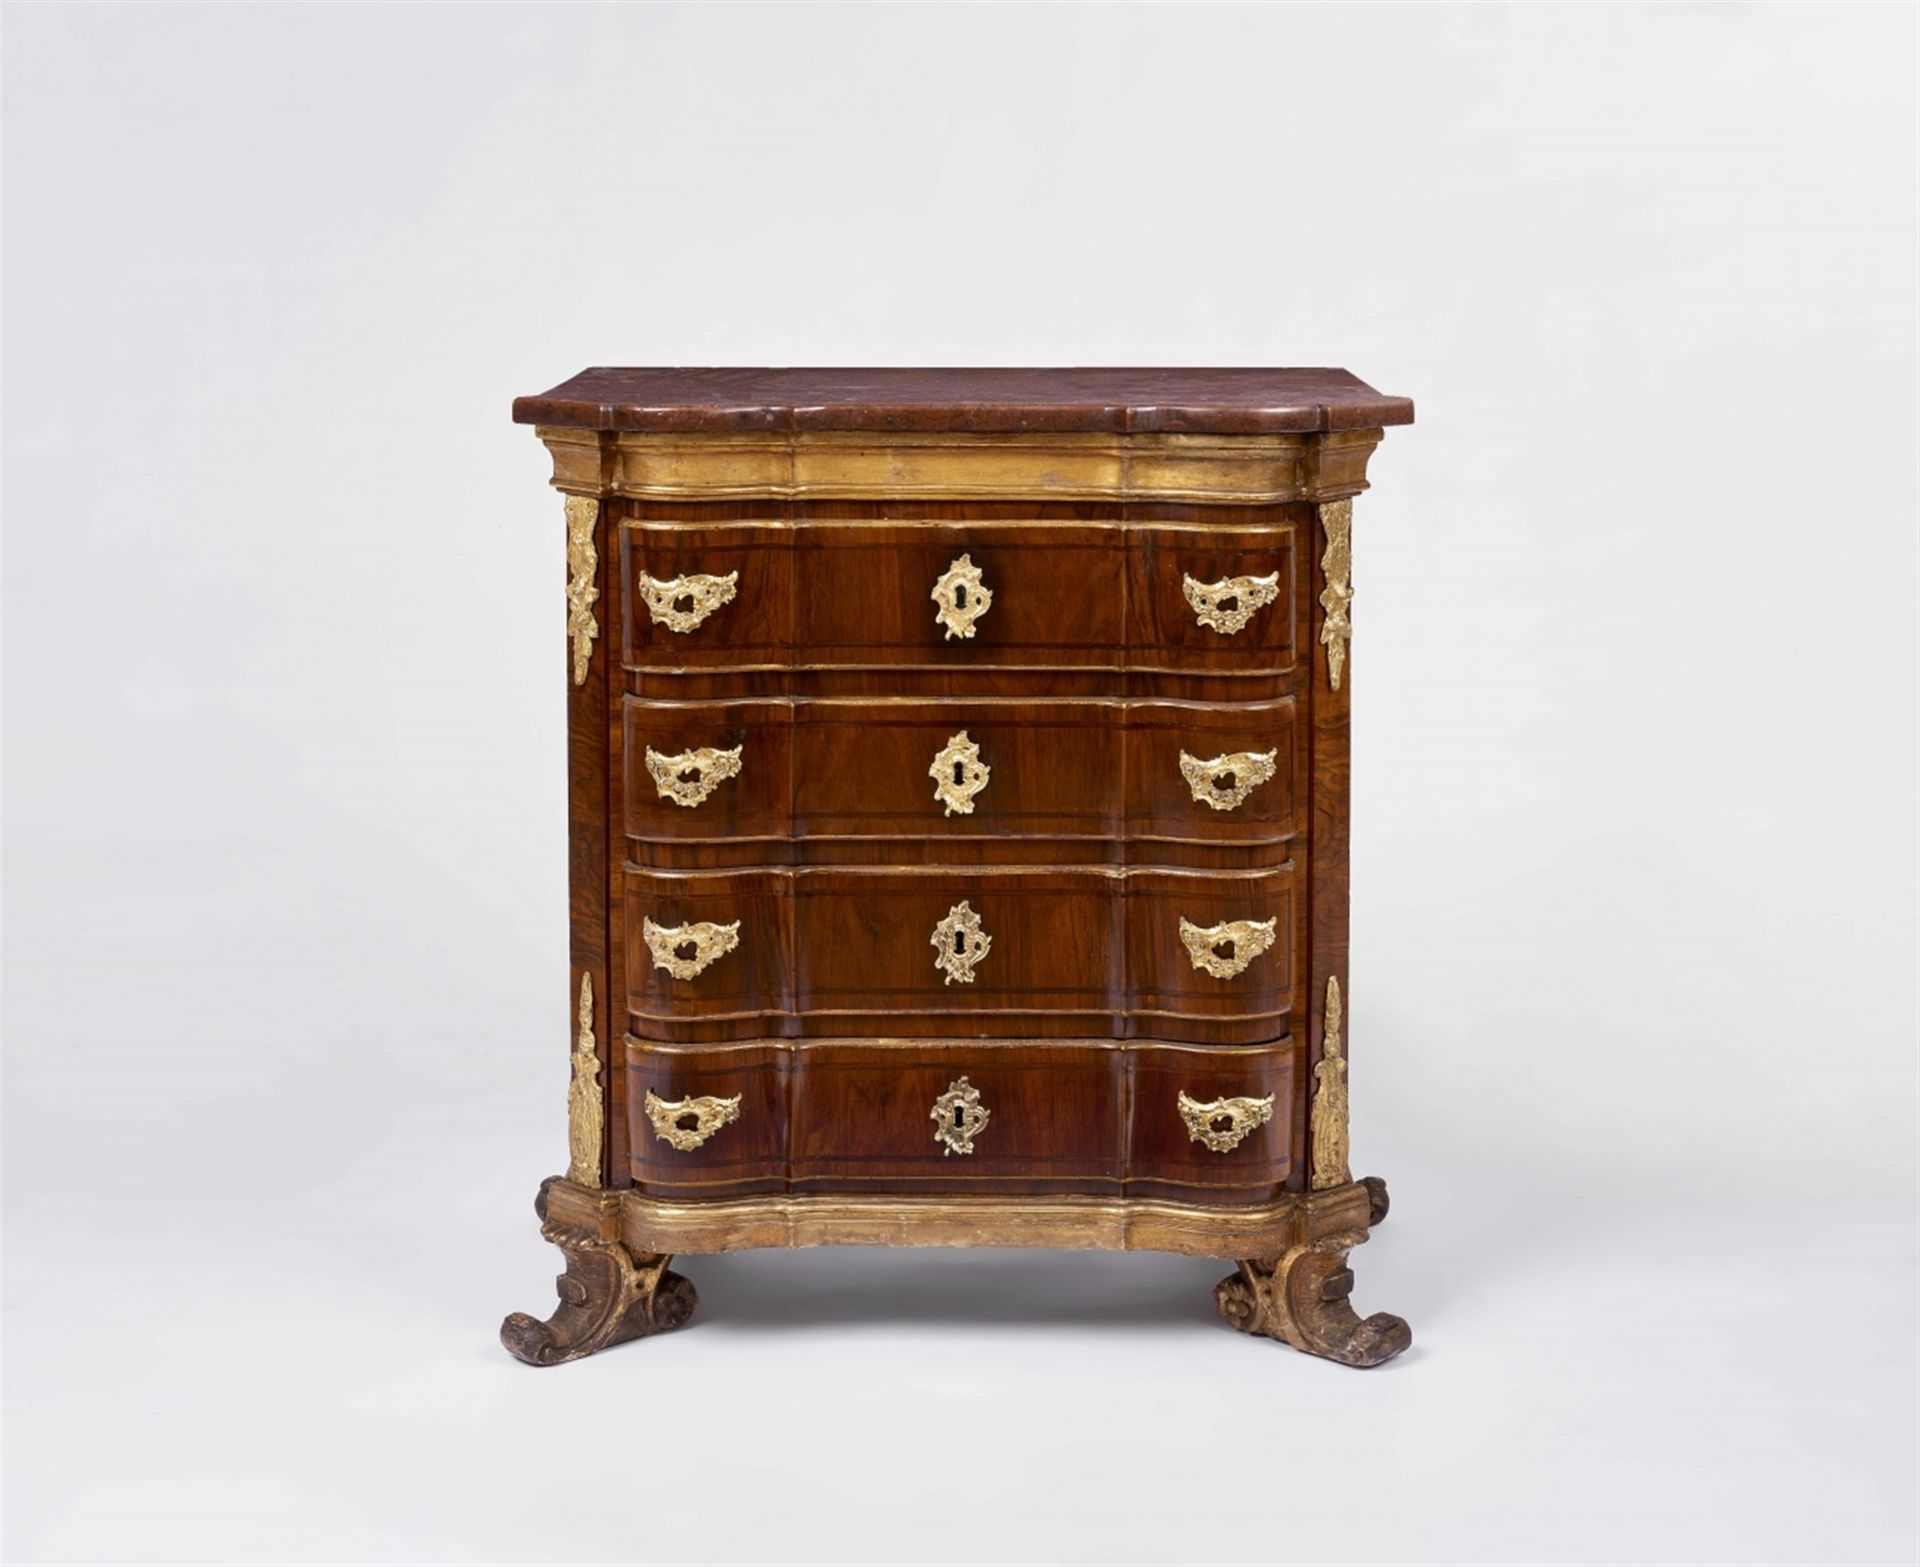 A Danish chest of drawers